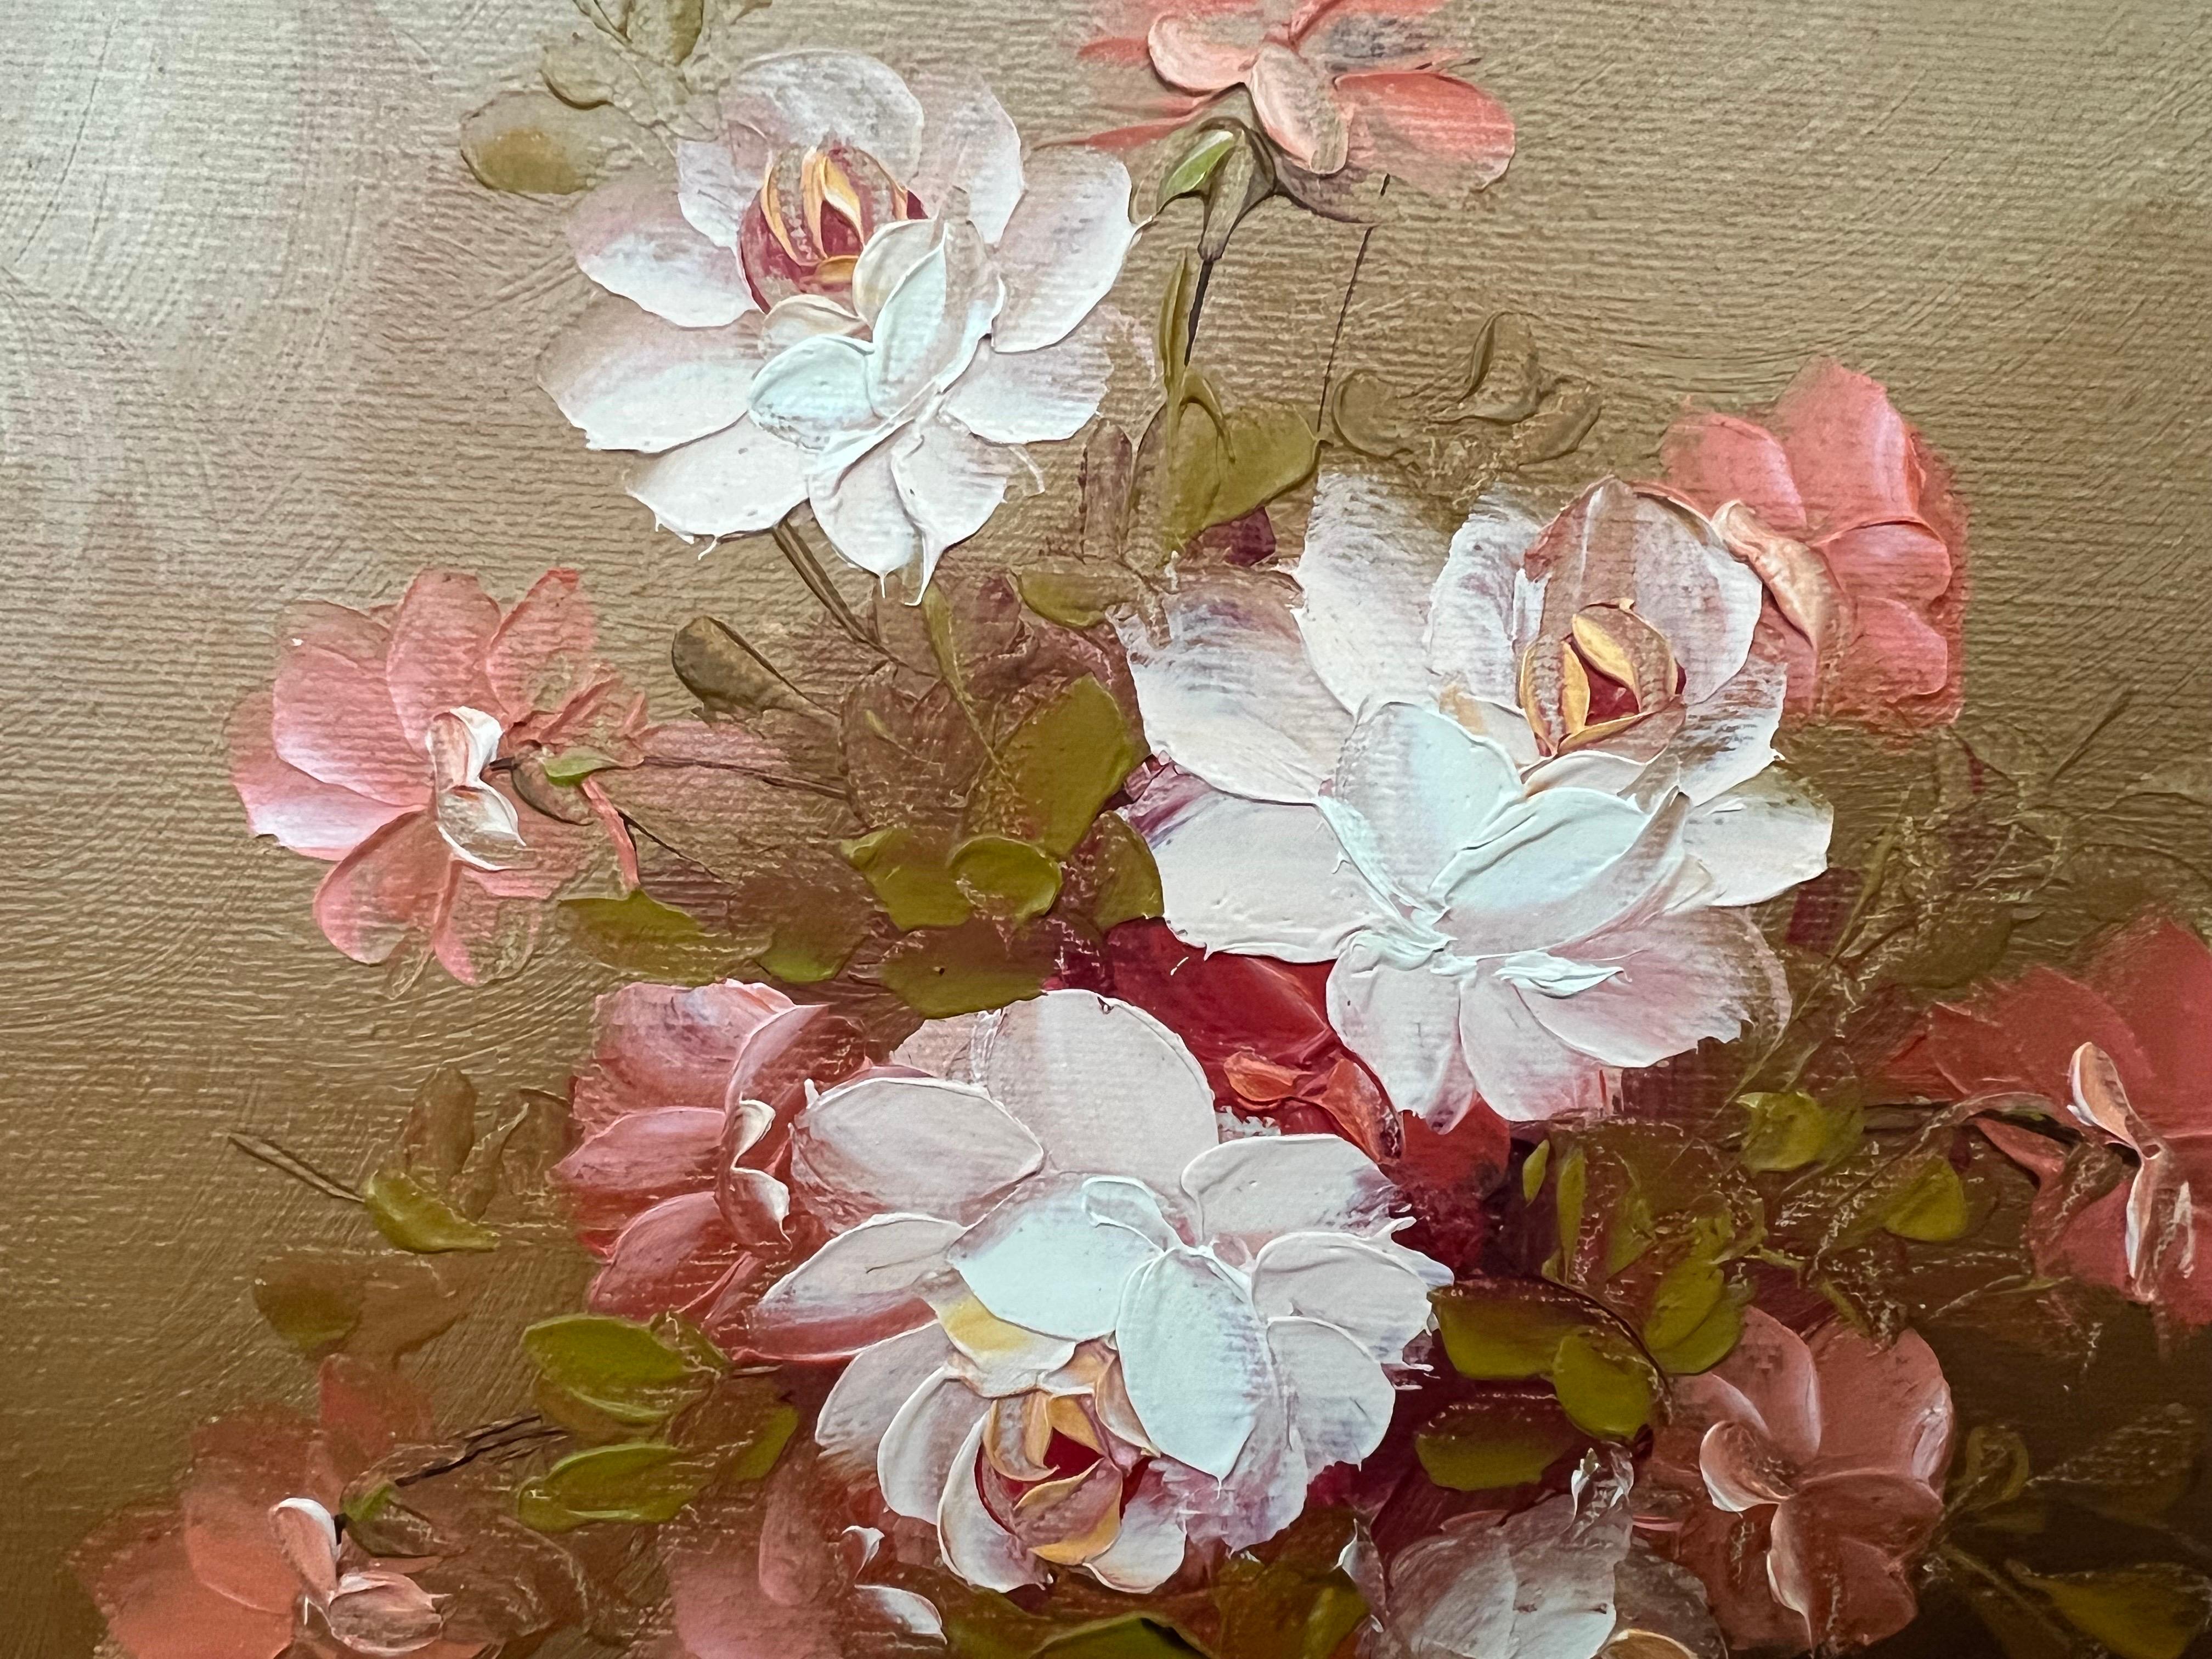 Still Life of a Vase of Pink Red & White Roses by 20th Century American Artist - Painting by Robert Cox